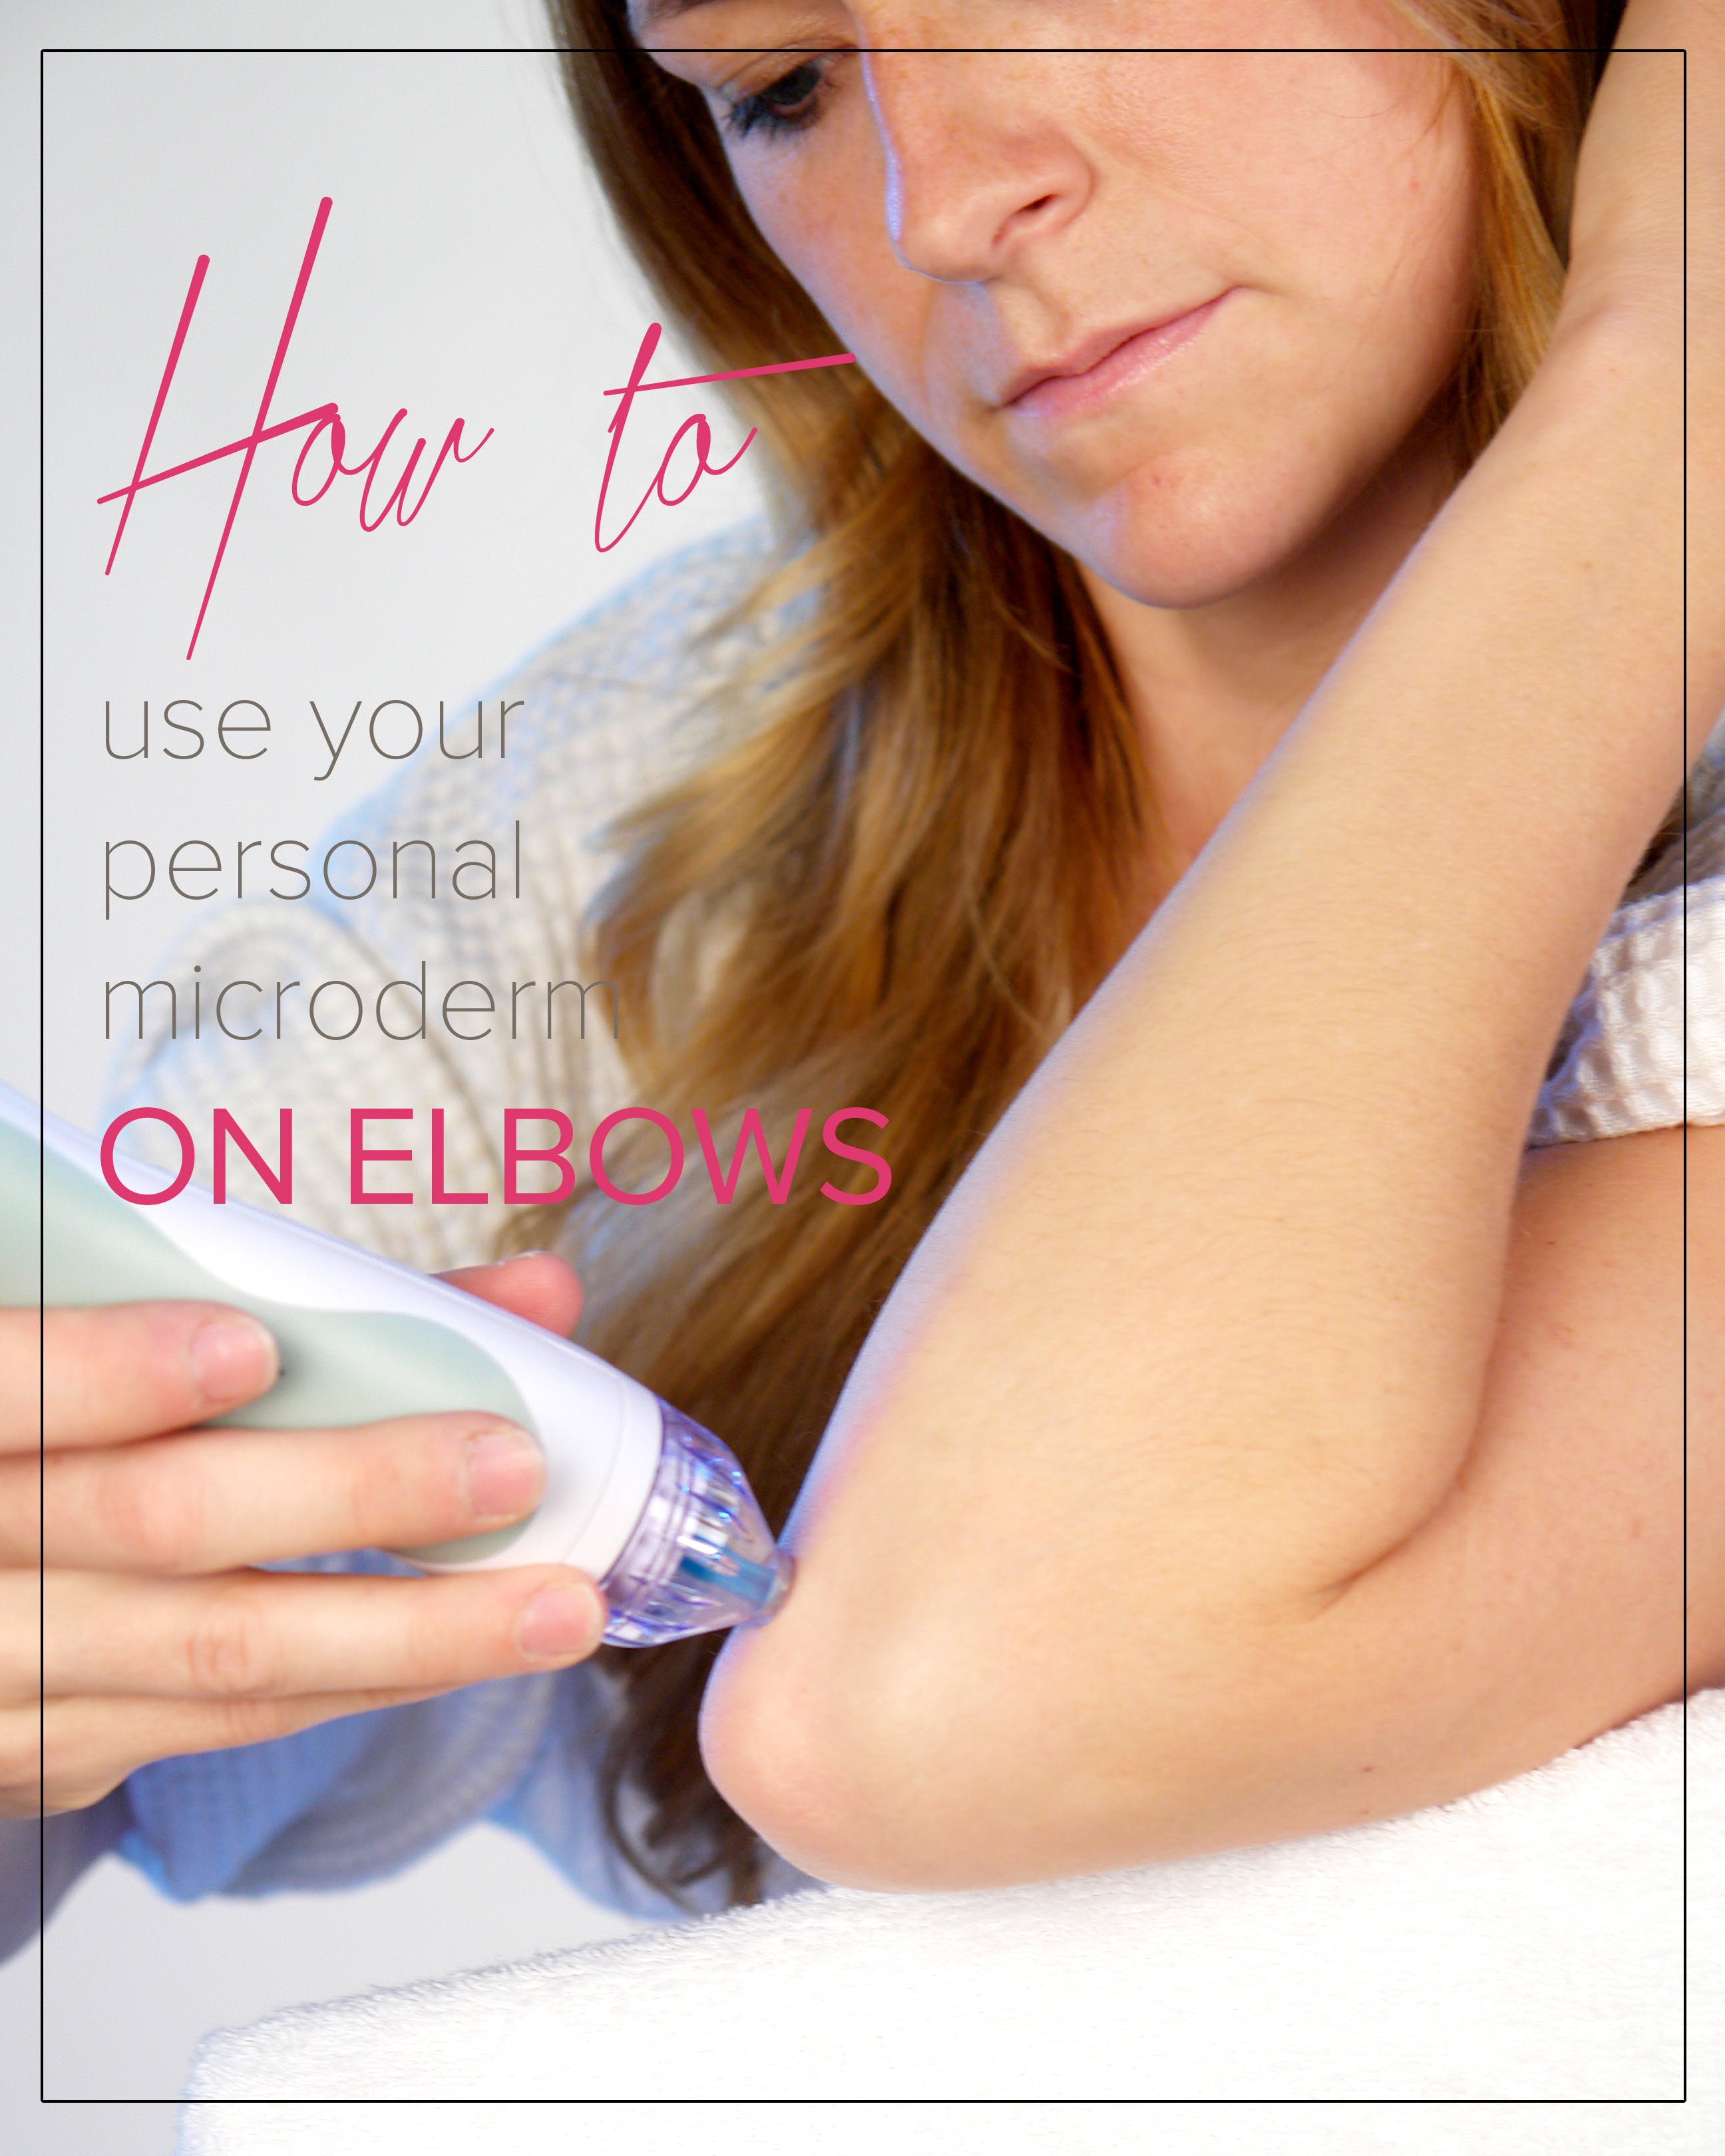 How to Use Your Personal Micorderm on Elbows